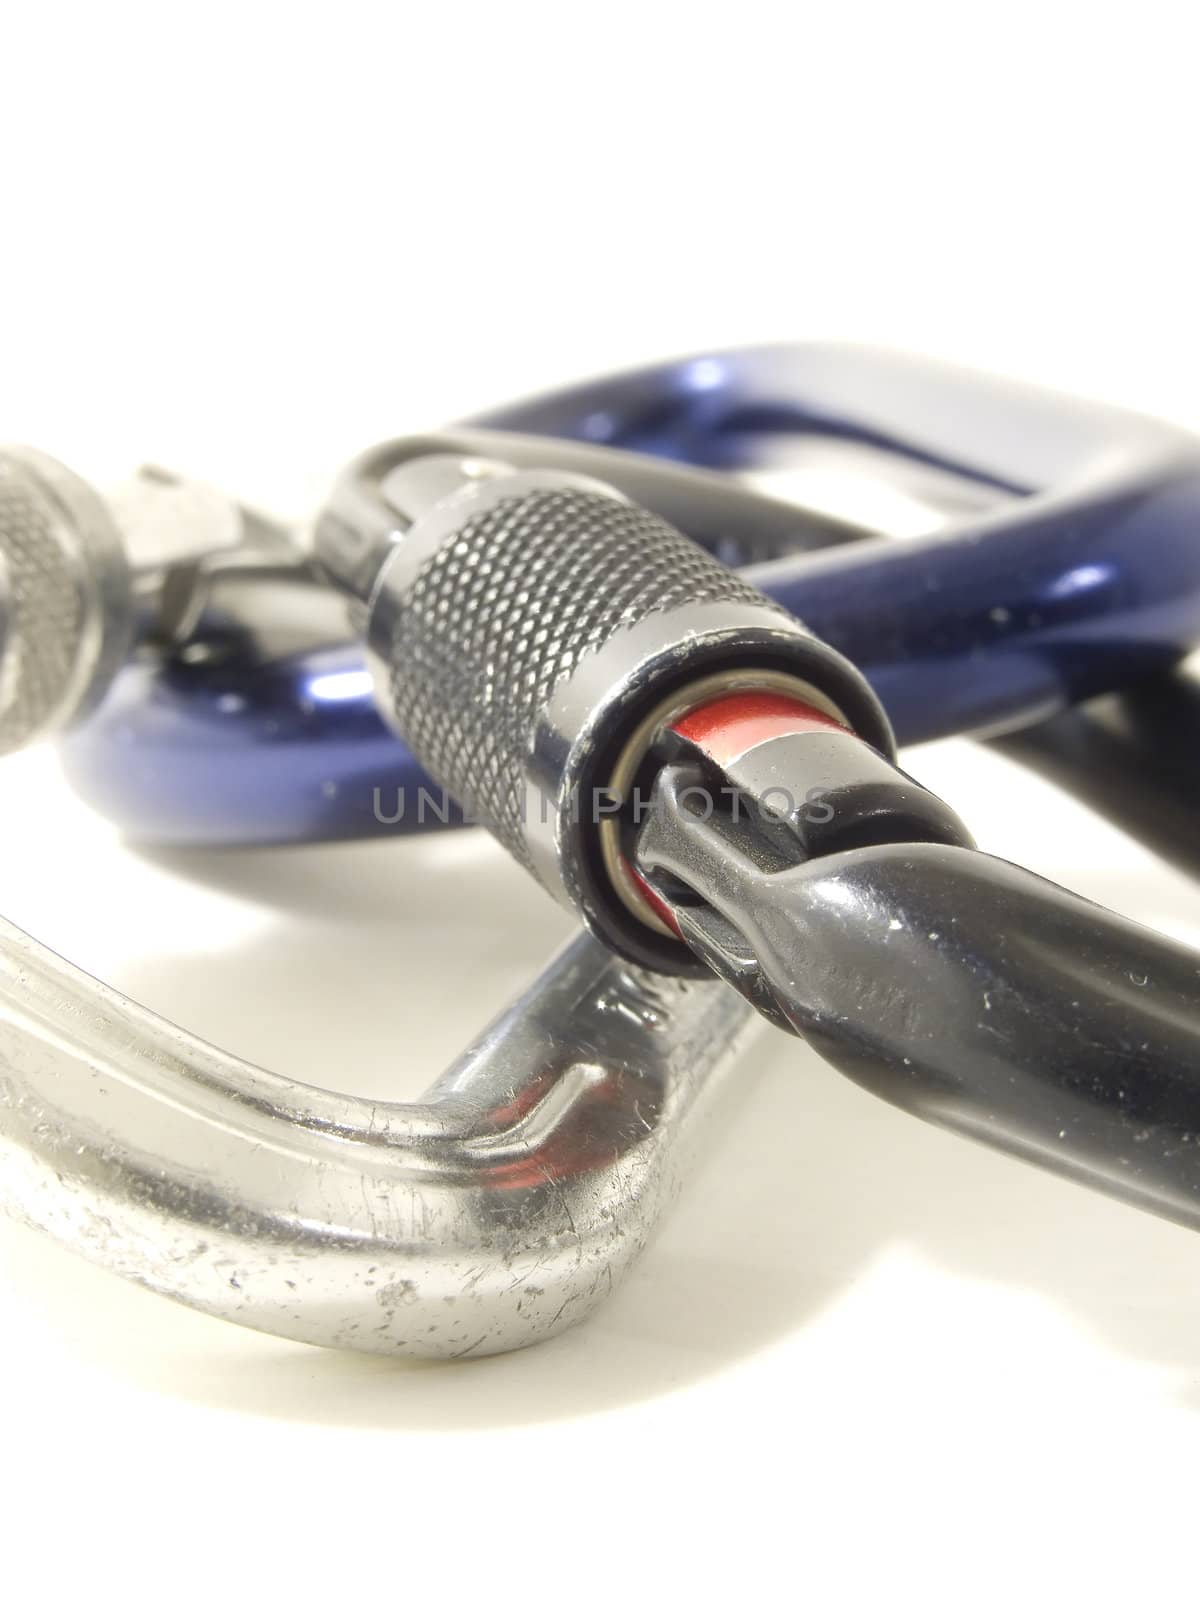 carabiner with DOF by PauloResende